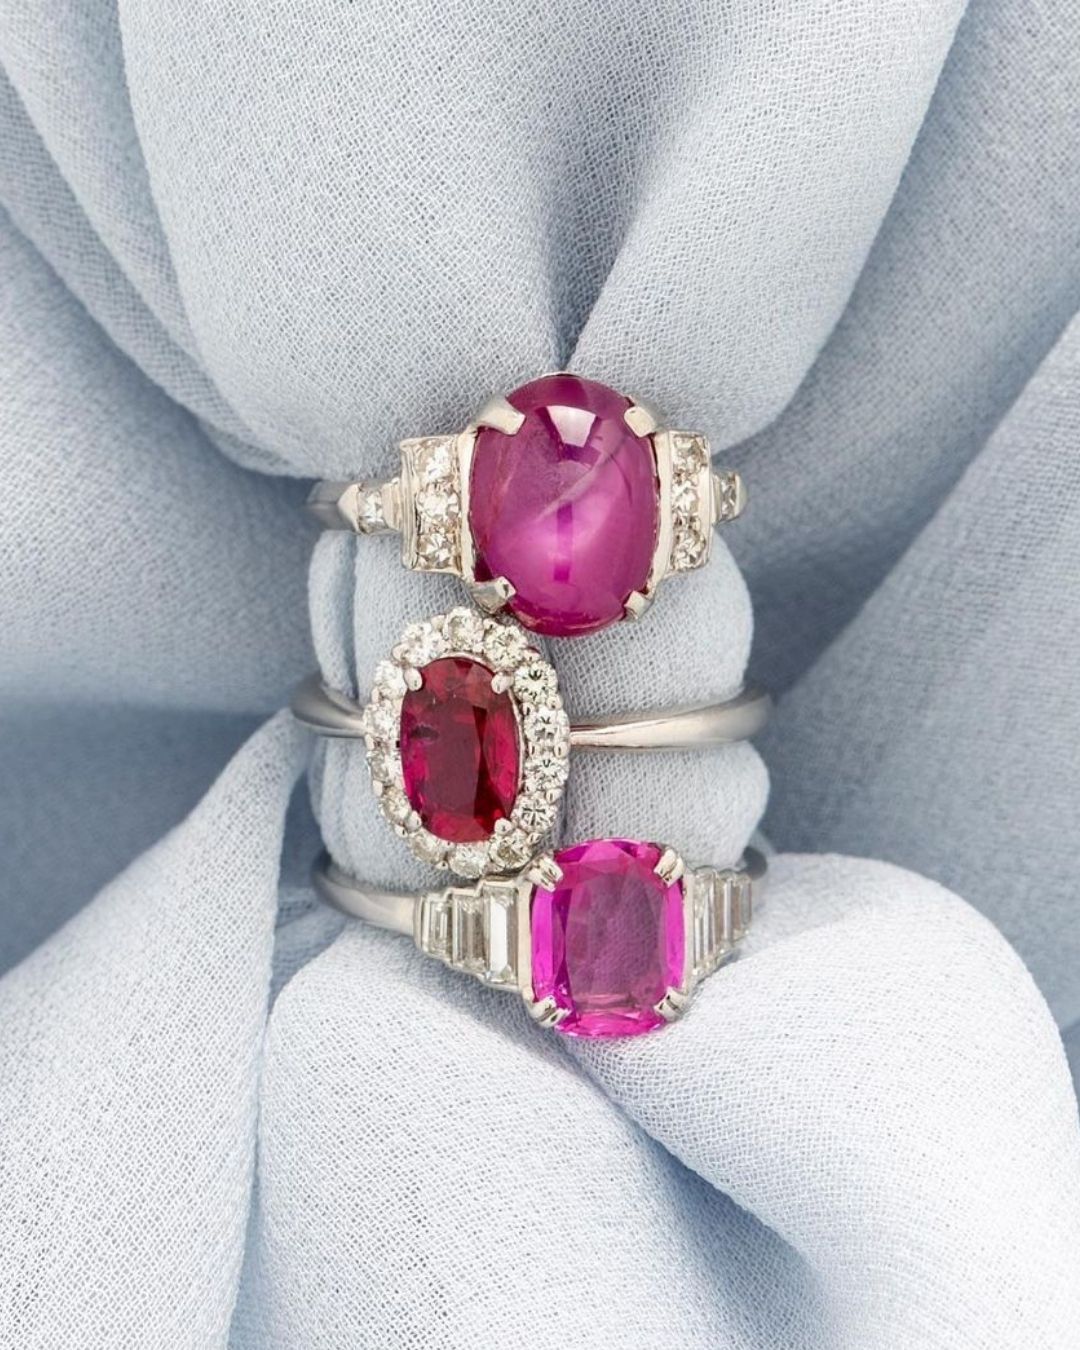 ruby engagement rings with amazing details